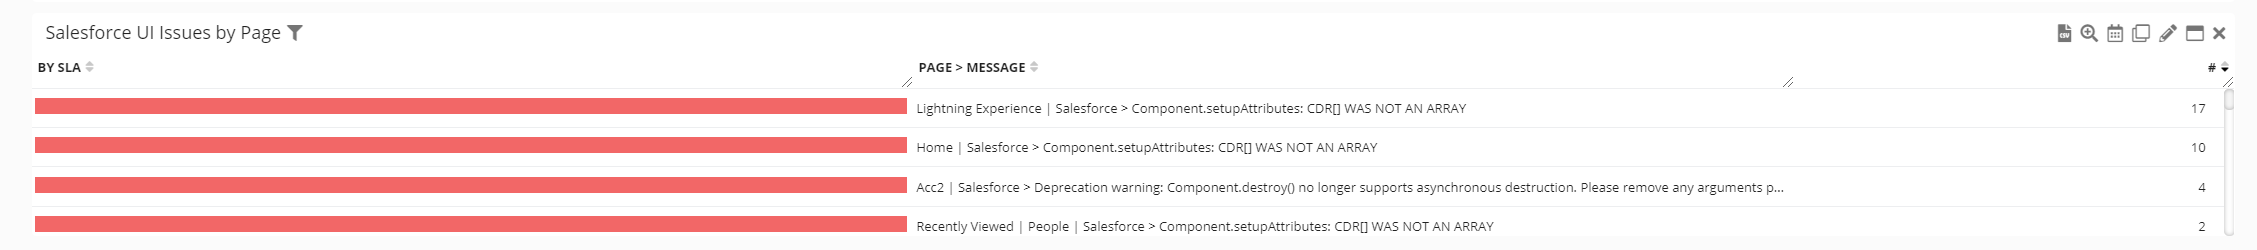 Salesforce UI Issues by page